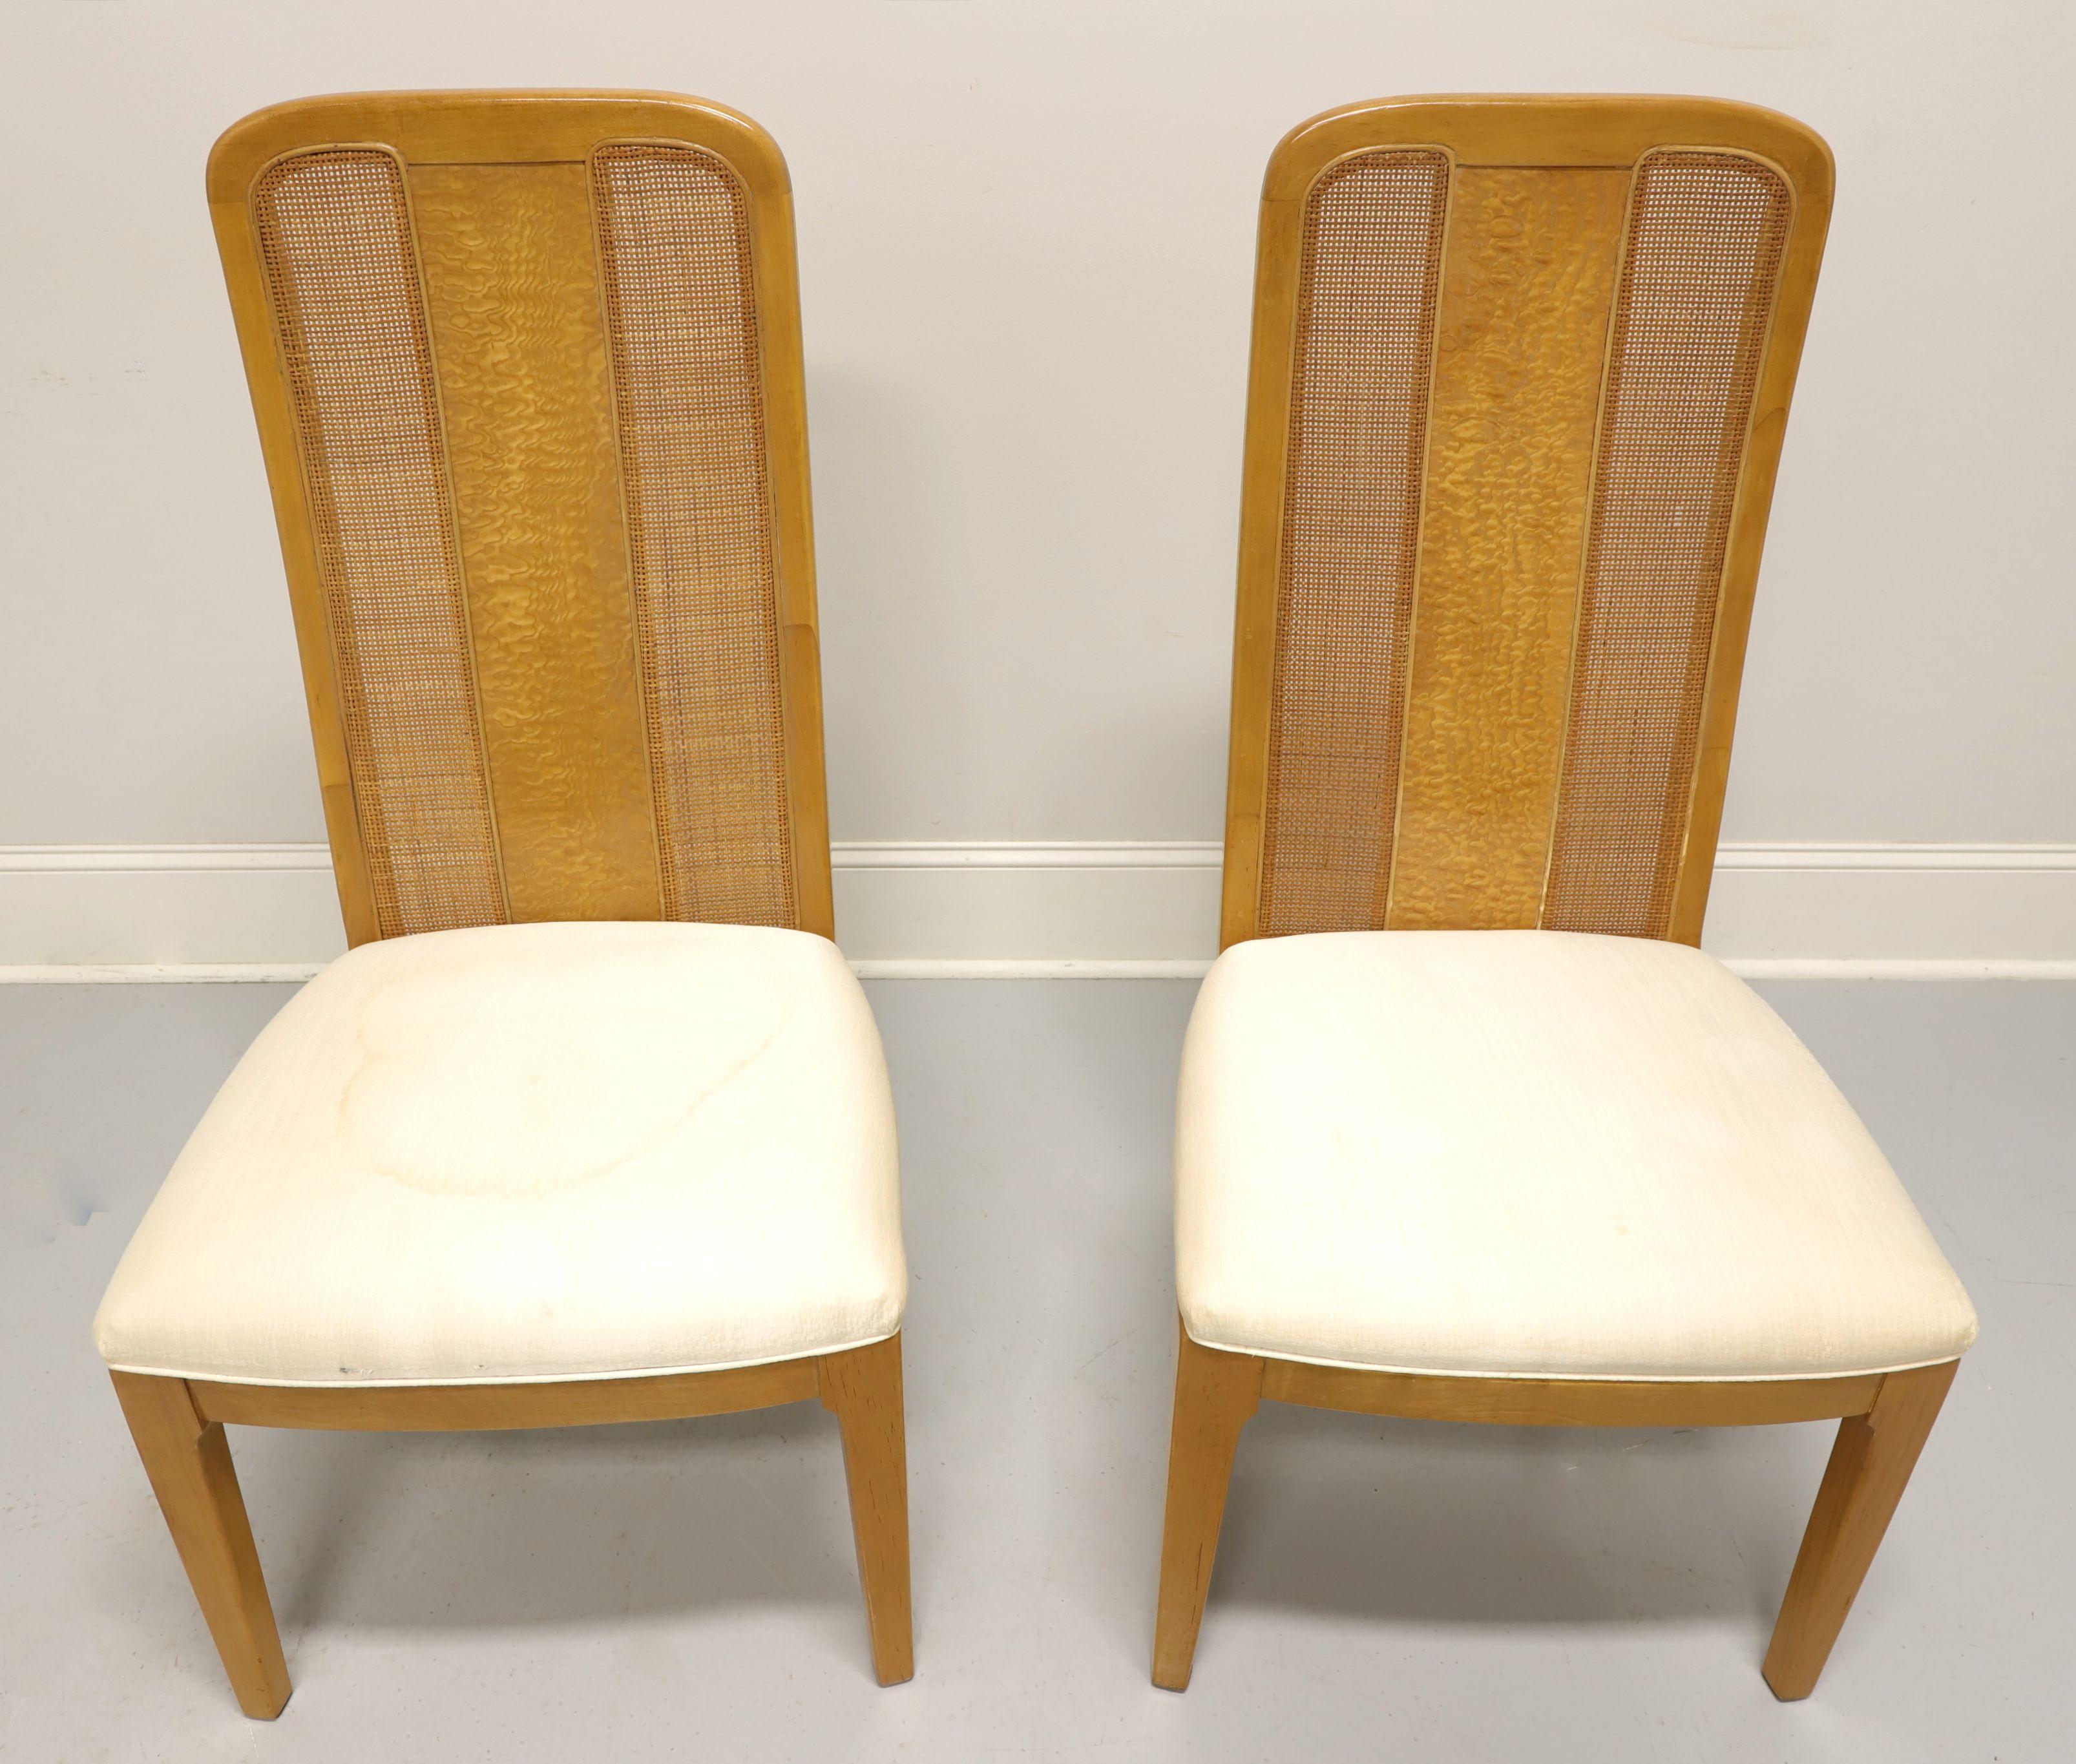 A pair of Contemporary style dining side chairs by Bernhardt Furniture. Maple with burl & cane back rest, neutral cream color fabric upholstered seat and straight front legs. Made in North Carolina, USA, in the late 20th Century.

Measures: overall: